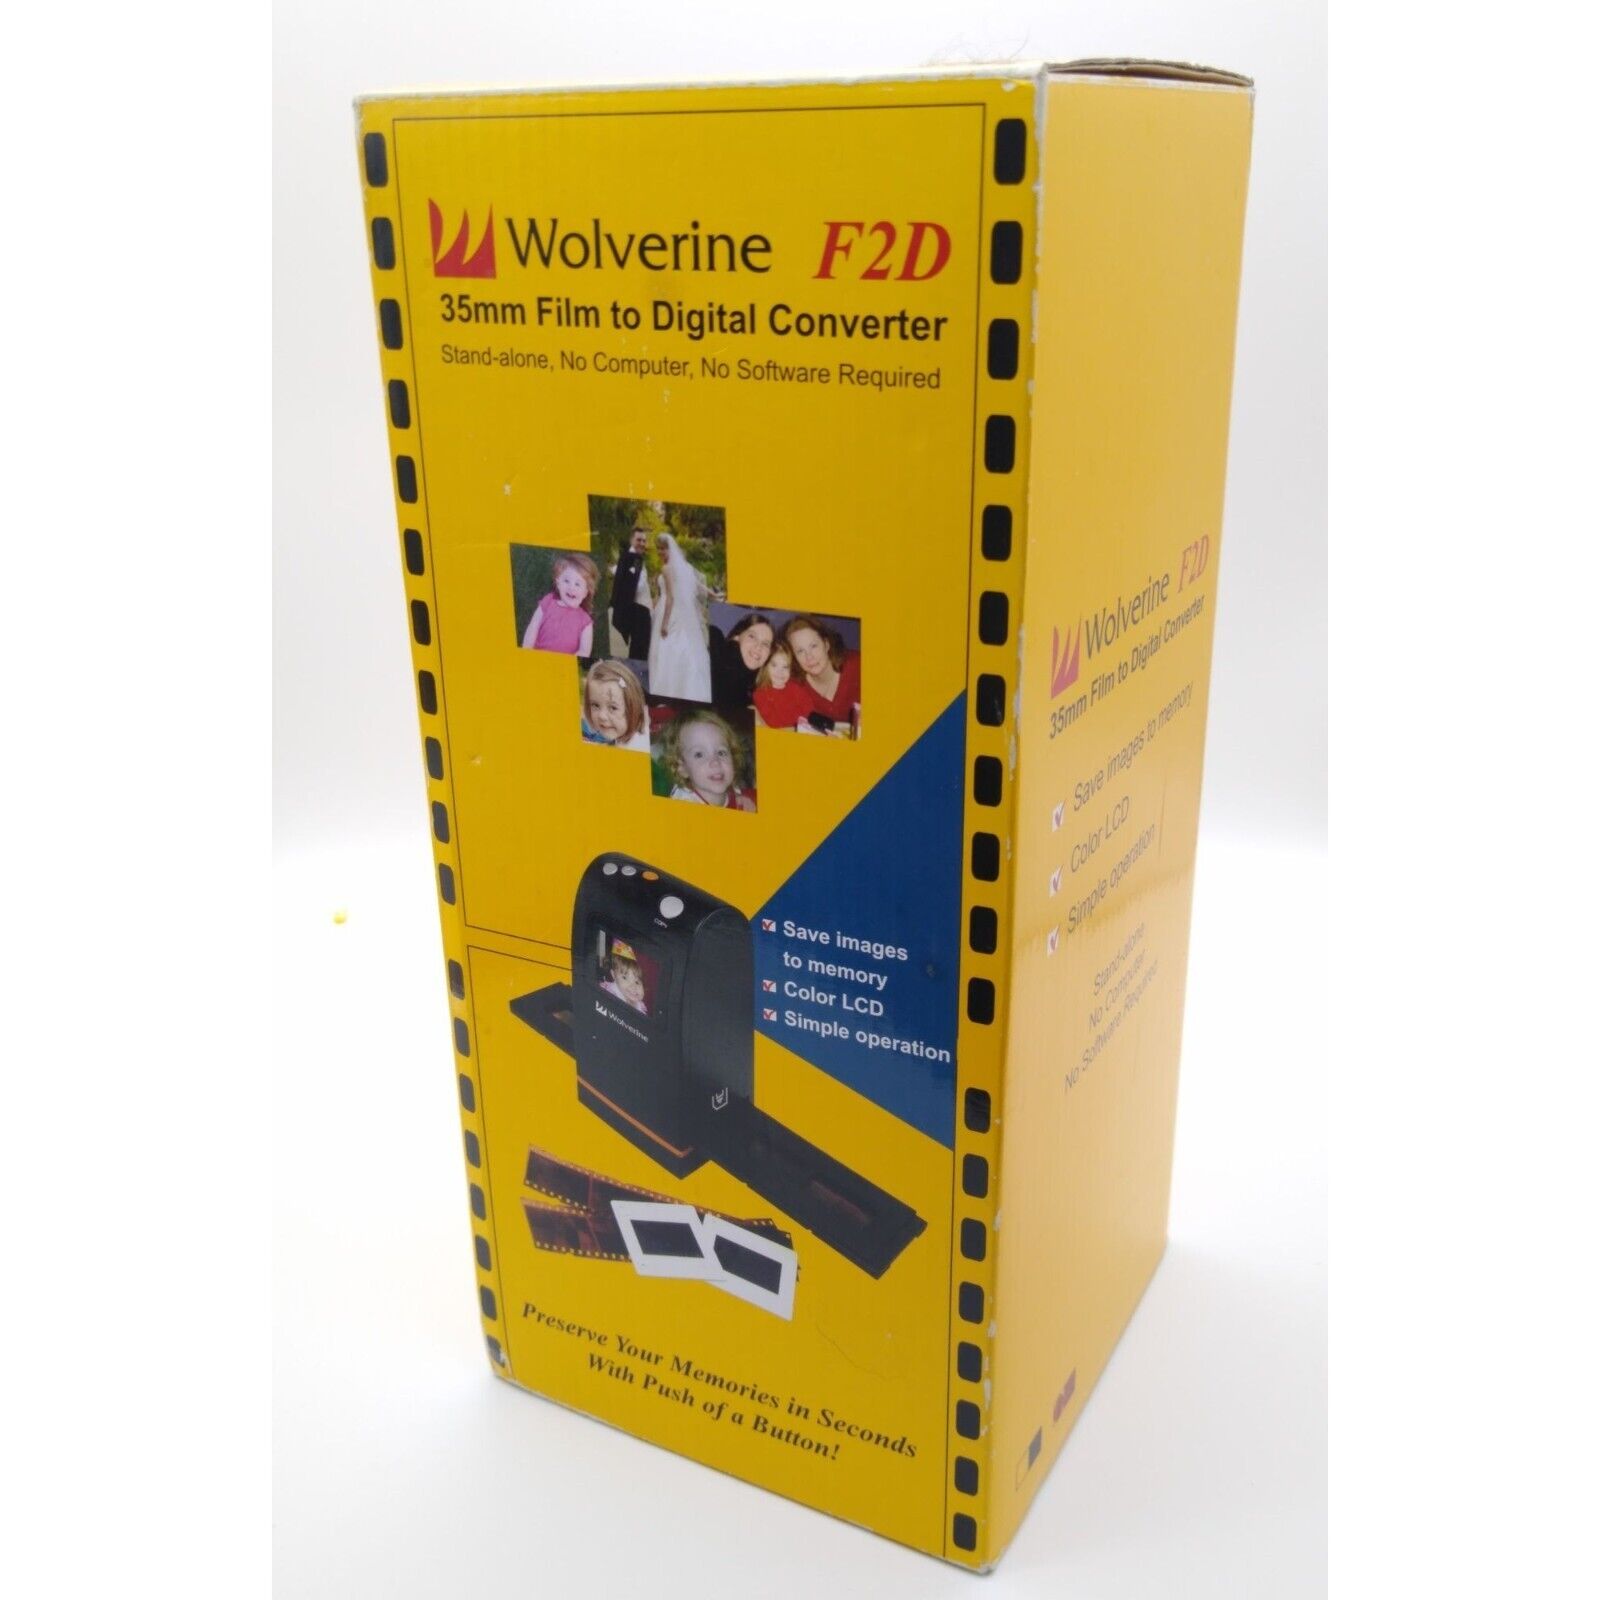 Vintage Wolverine F2D 35mm Film to Digital Converter New in Opened Box, Preserve